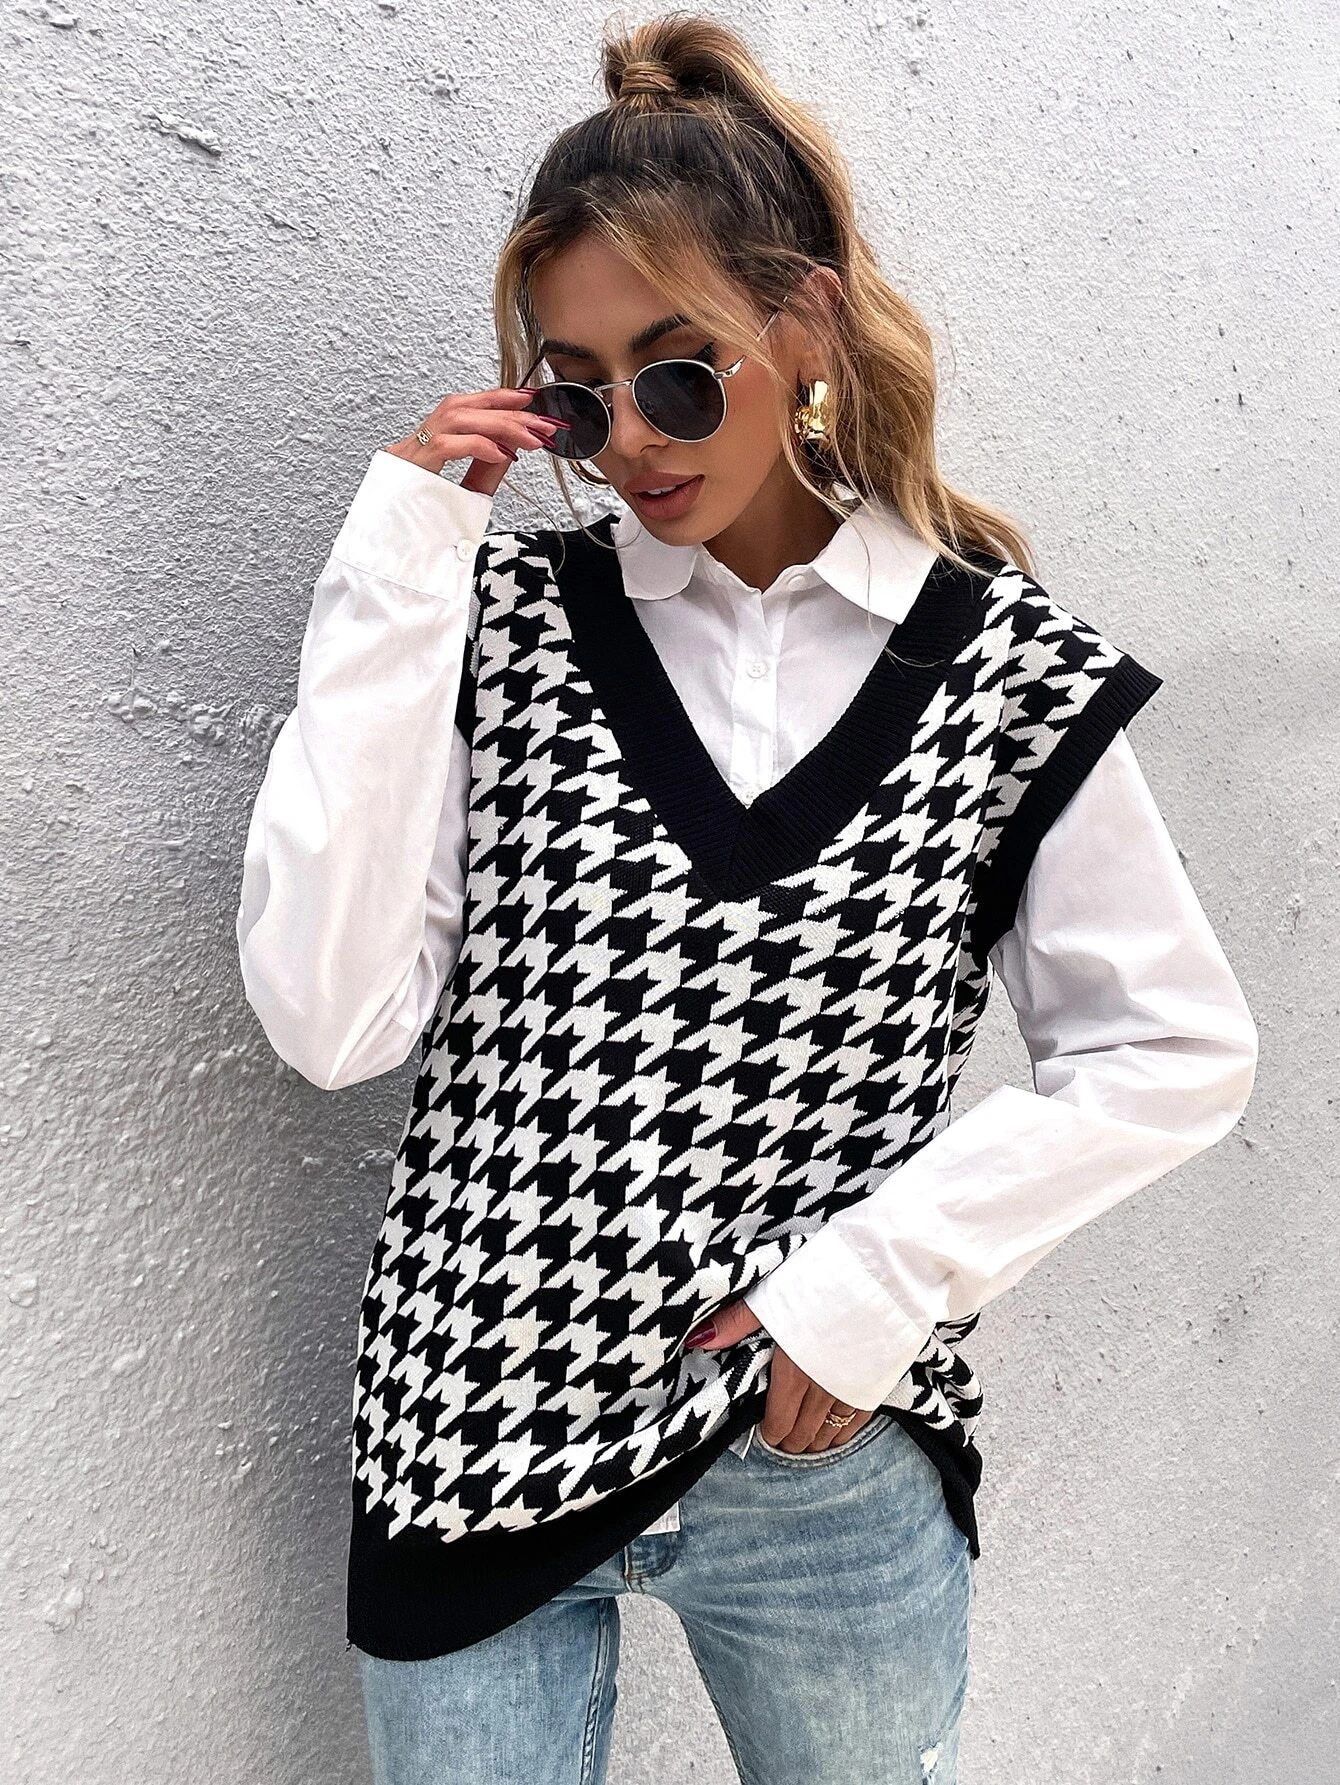 Houndstooth Pattern Sweater Vest Without Blouse | SHEIN